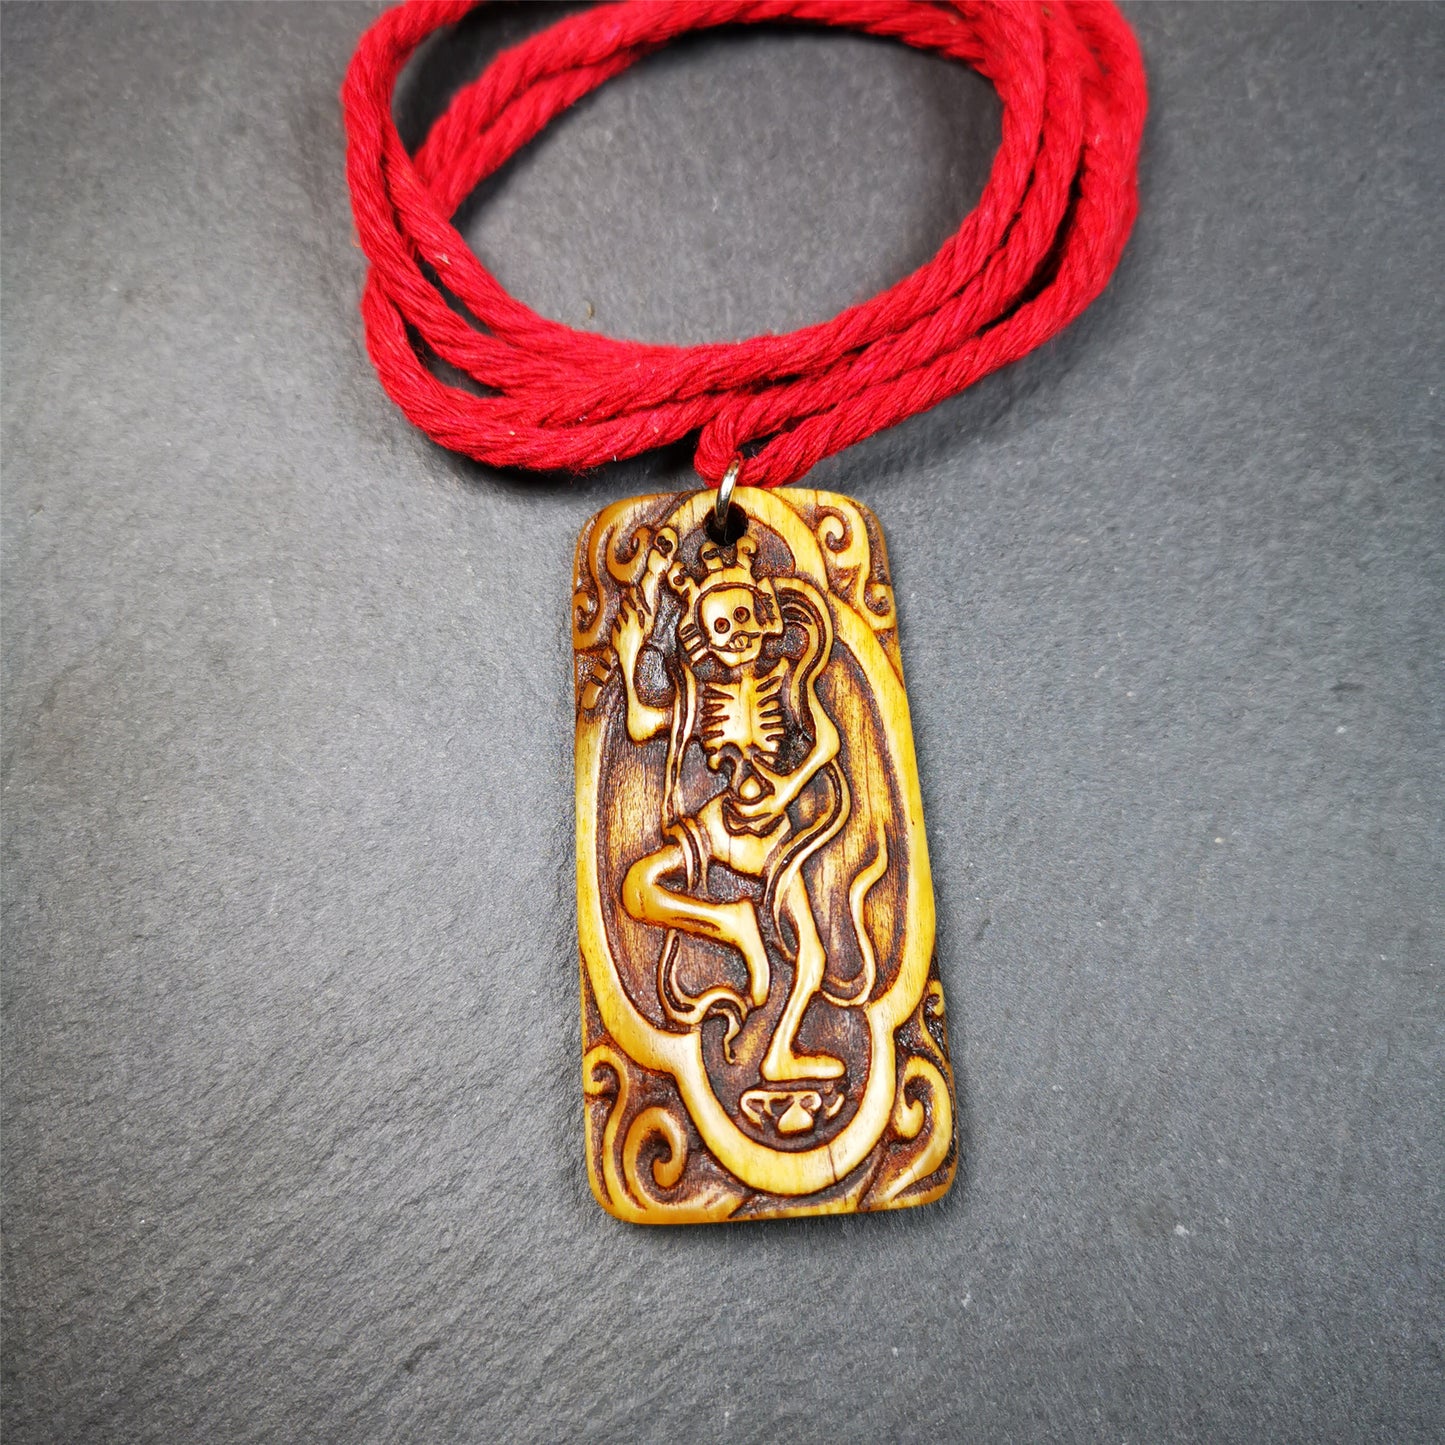 This beautiful bone carved Chitipati skull amulet is hand carved by Tibetan craftsmen . It is Masters of Sitavana, entirely hand-carved of yak bone,wears a crown with 3 skulls,size is 2.3 inches